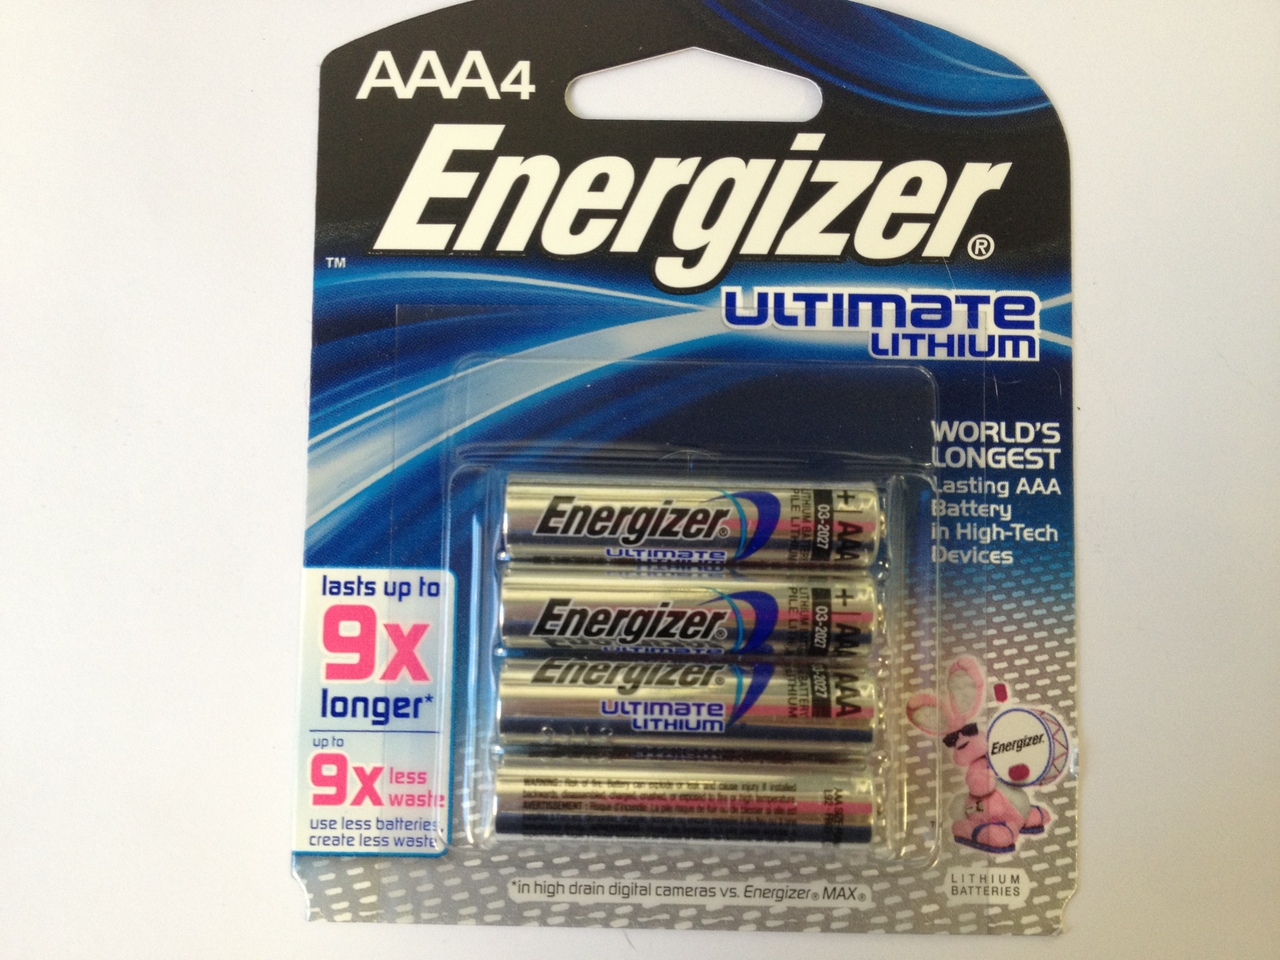 Energizer L92 AAA Lithium Batteries 1.5V - Retail Packaging - 4 Pack + FREE SHIPPING!